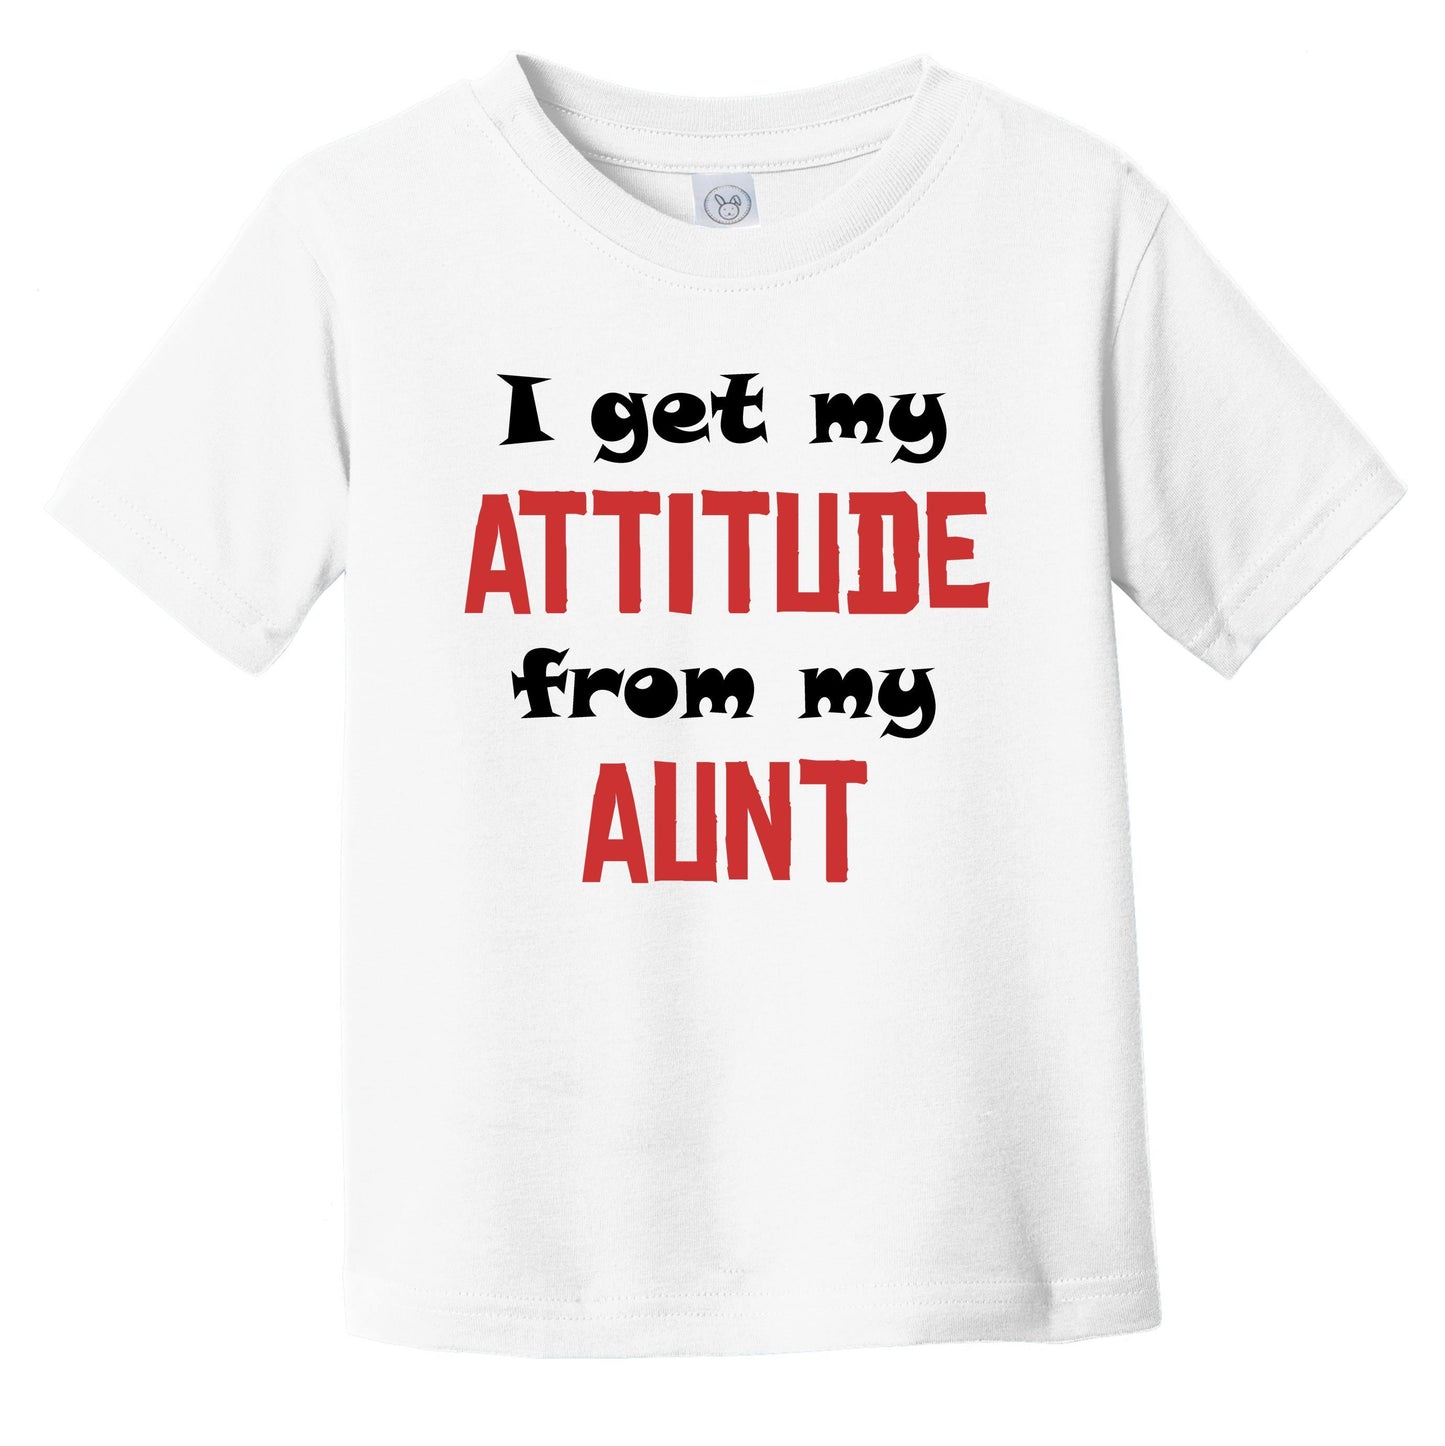 I Get My Attitude From My Aunt Funny Infant Toddler T-Shirt